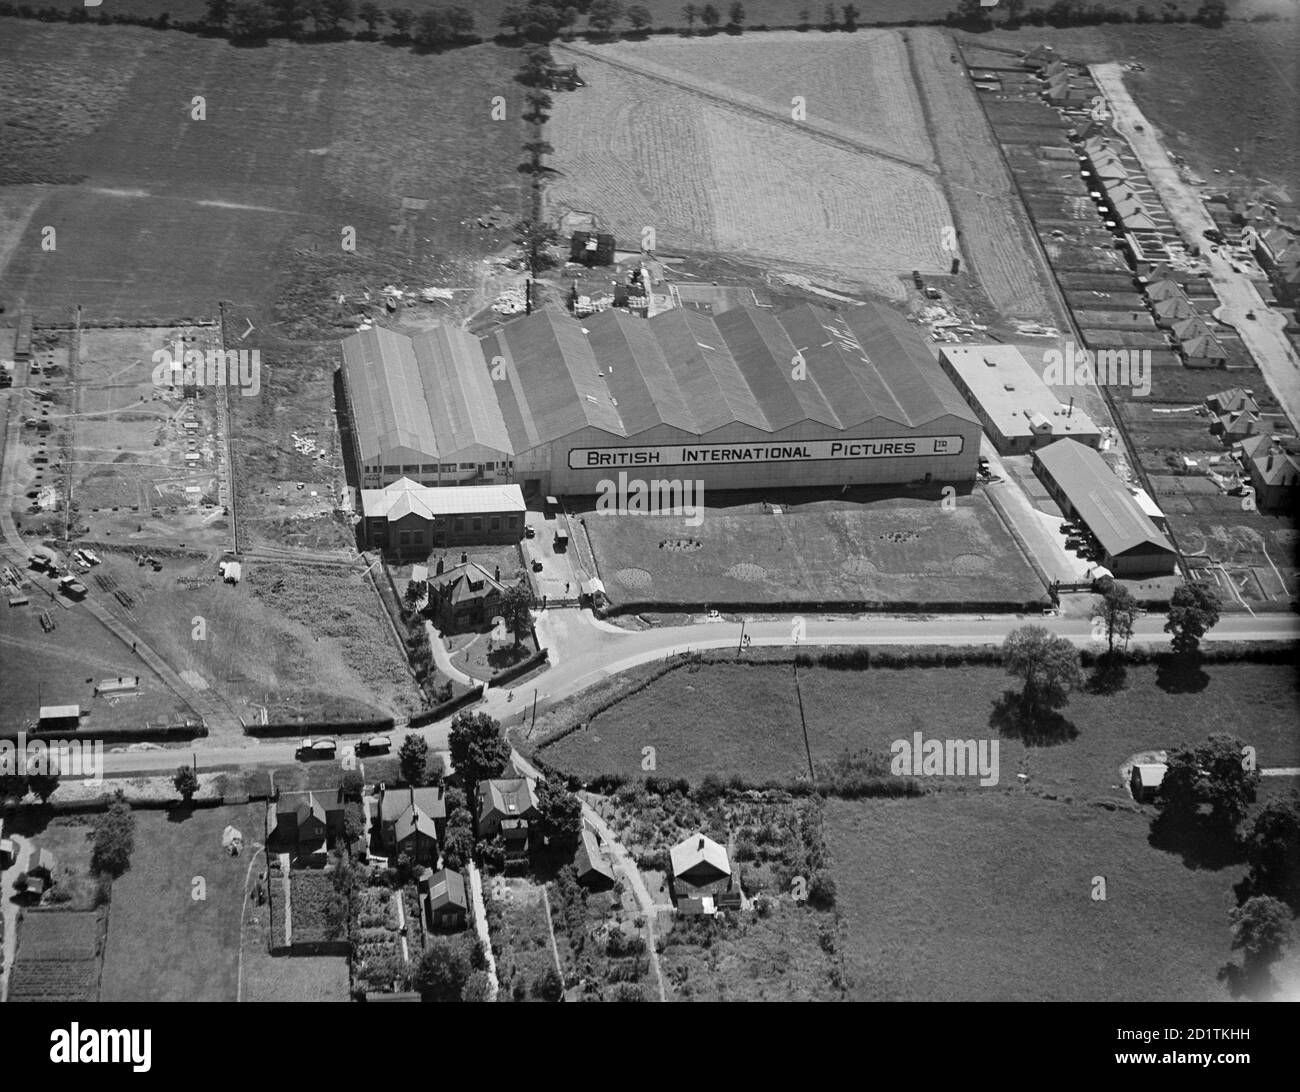 ELSTREE STUDIOS, Shenley Road, Borehamwood. Aerial view. Premises of British International Pictures Ltd. Photographed in July 1928. Aerofilms Collection. Stock Photo